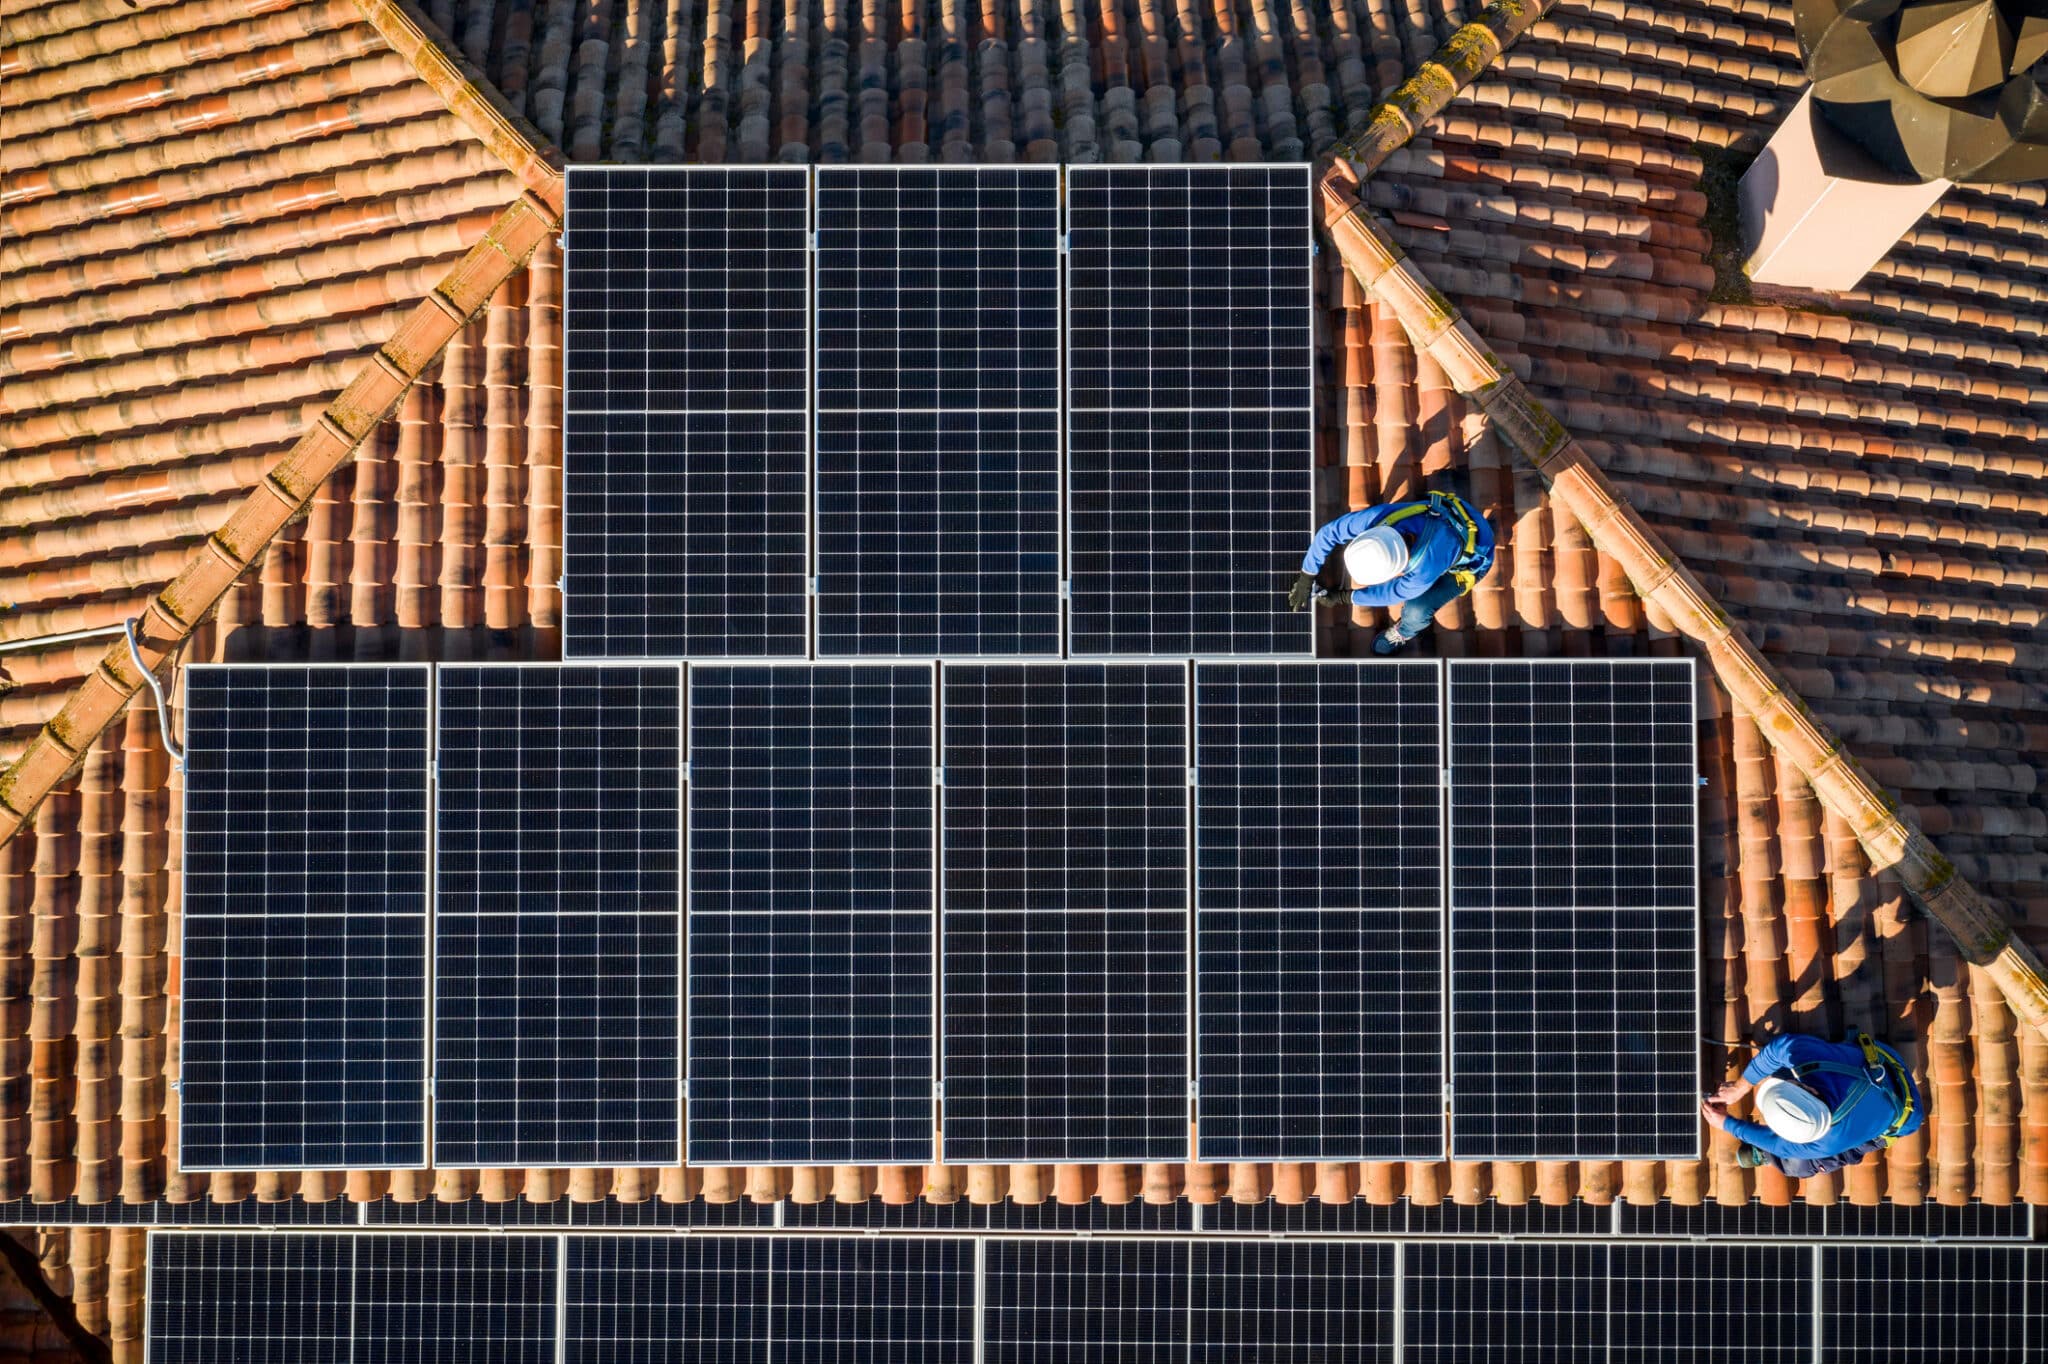 1 in 4 Homeowners Plans to Install Solar Panels in the Next 5 Years